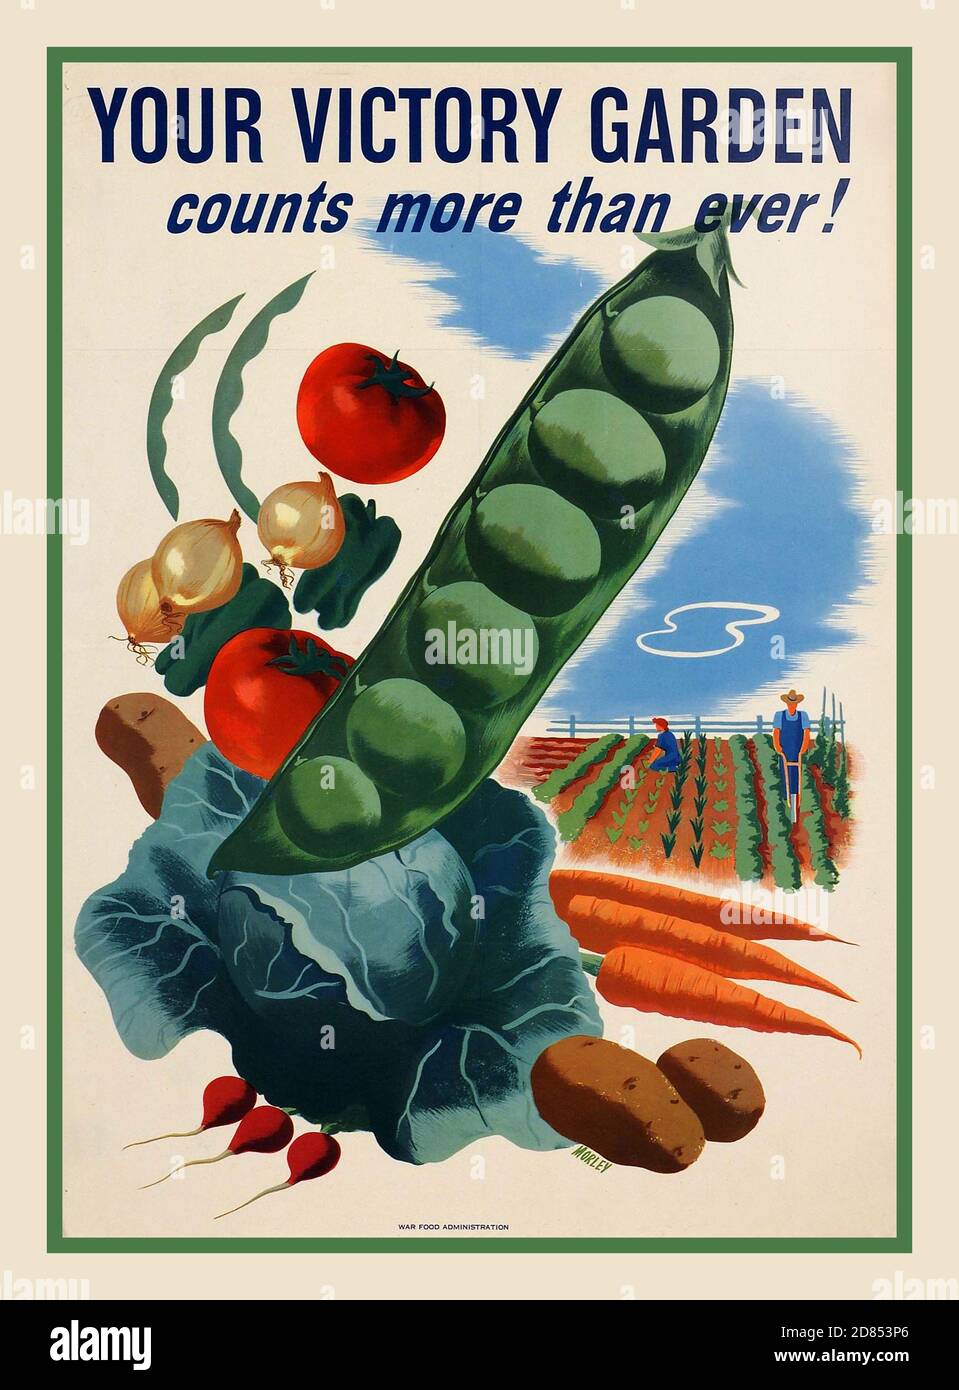 Vintage WW2 VICTORY GARDEN Propaganda Homeland Food growing producing poster YOUR VICTORY GARDEN COUNTS MORE THAN EVER! (MORLEY) 1940s During World War II, as an alternative to rationing, Americans planted “victory gardens,” in which they grew their own food. By 1945, some 20 million such gardens were in use and accounted for about 40 percent of all vegetables consumed in the U.S. Stock Photo